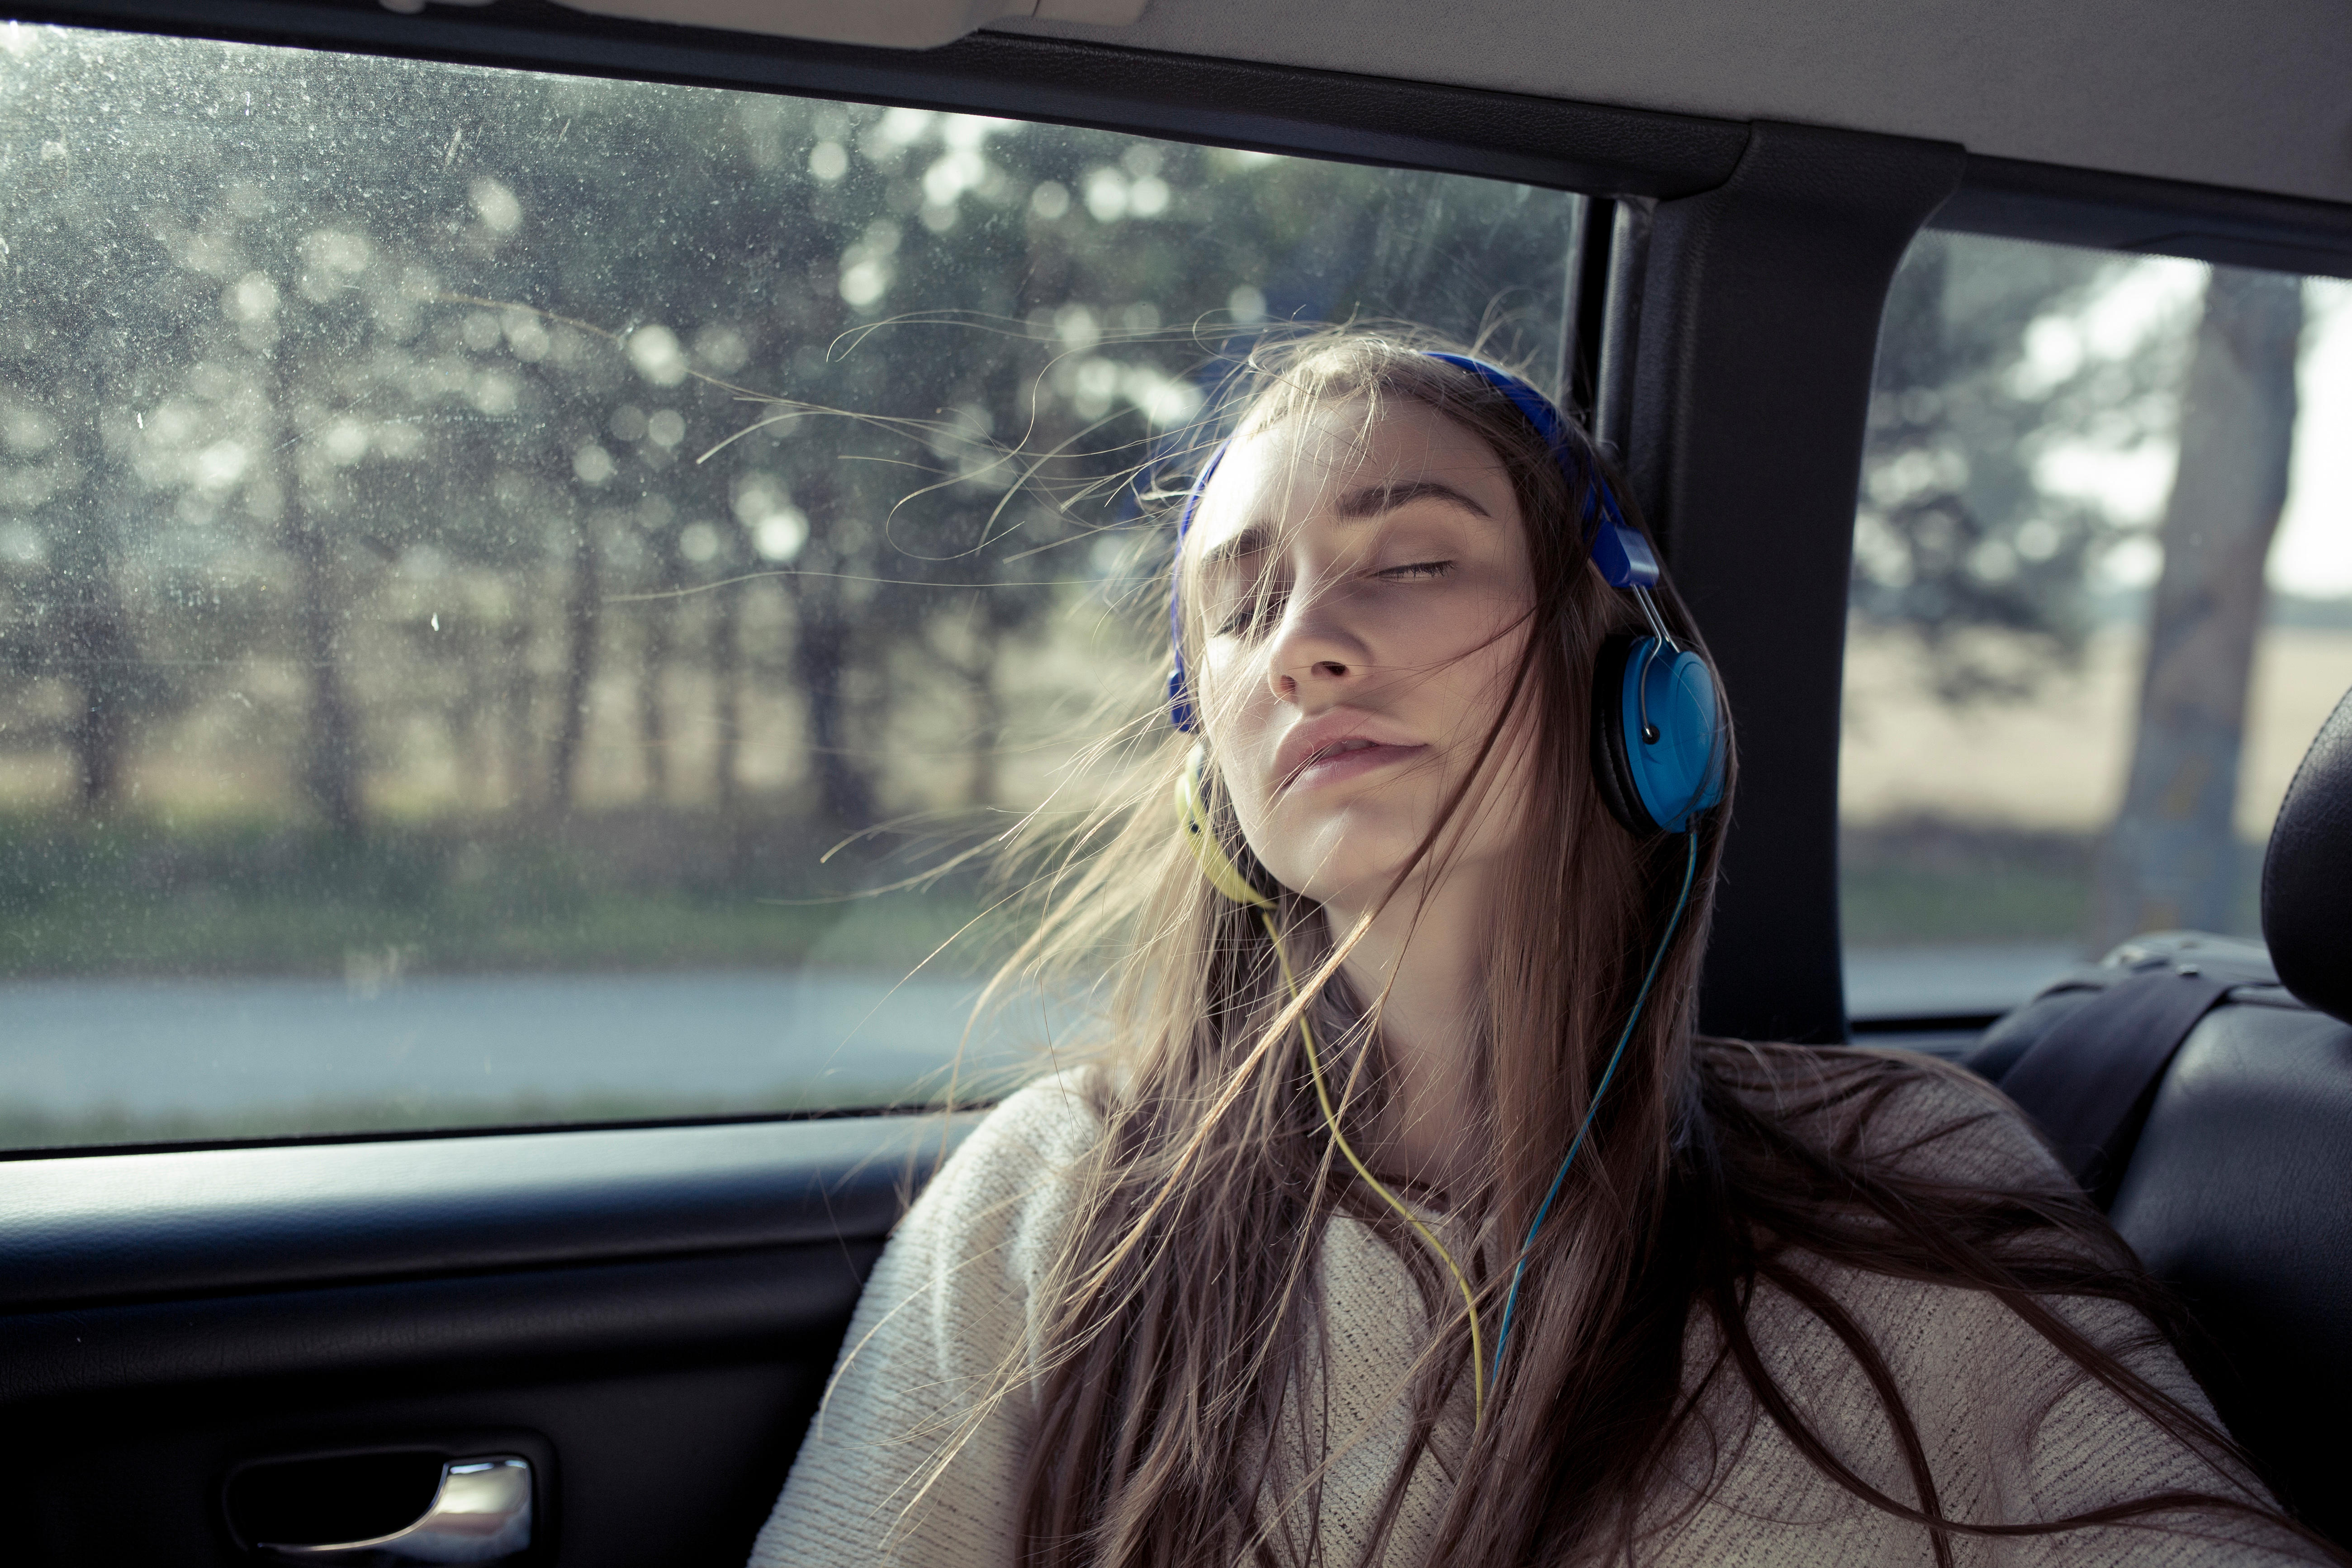 Listening to music while driving may help calm the heart